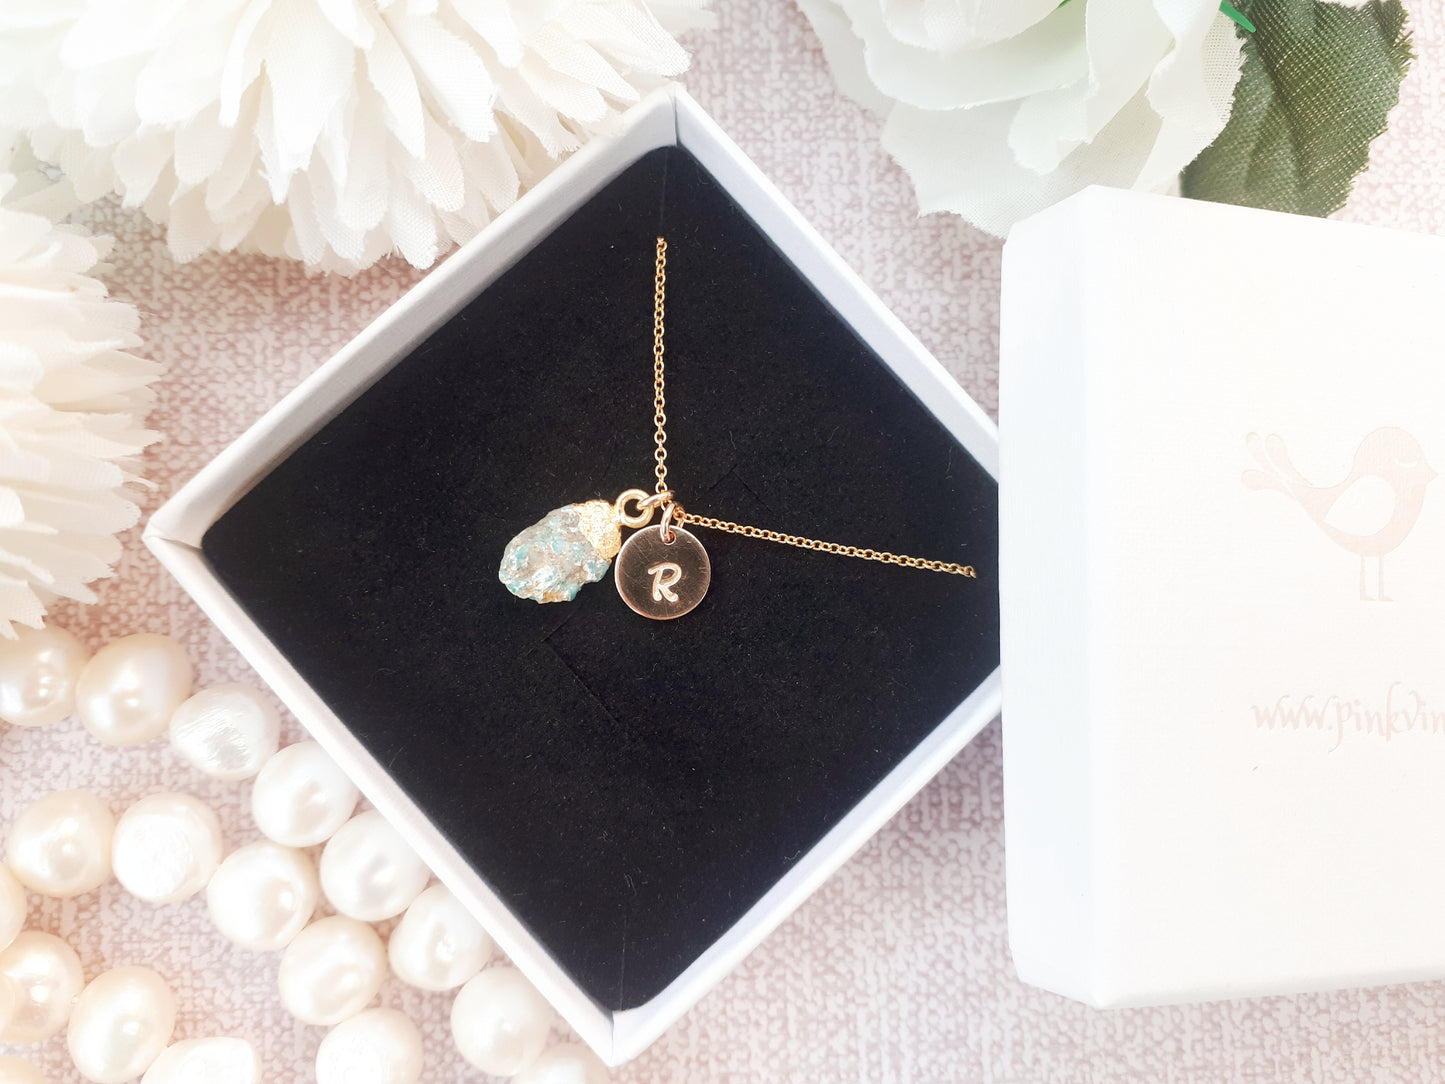 Personalised turquoise necklace in gold.